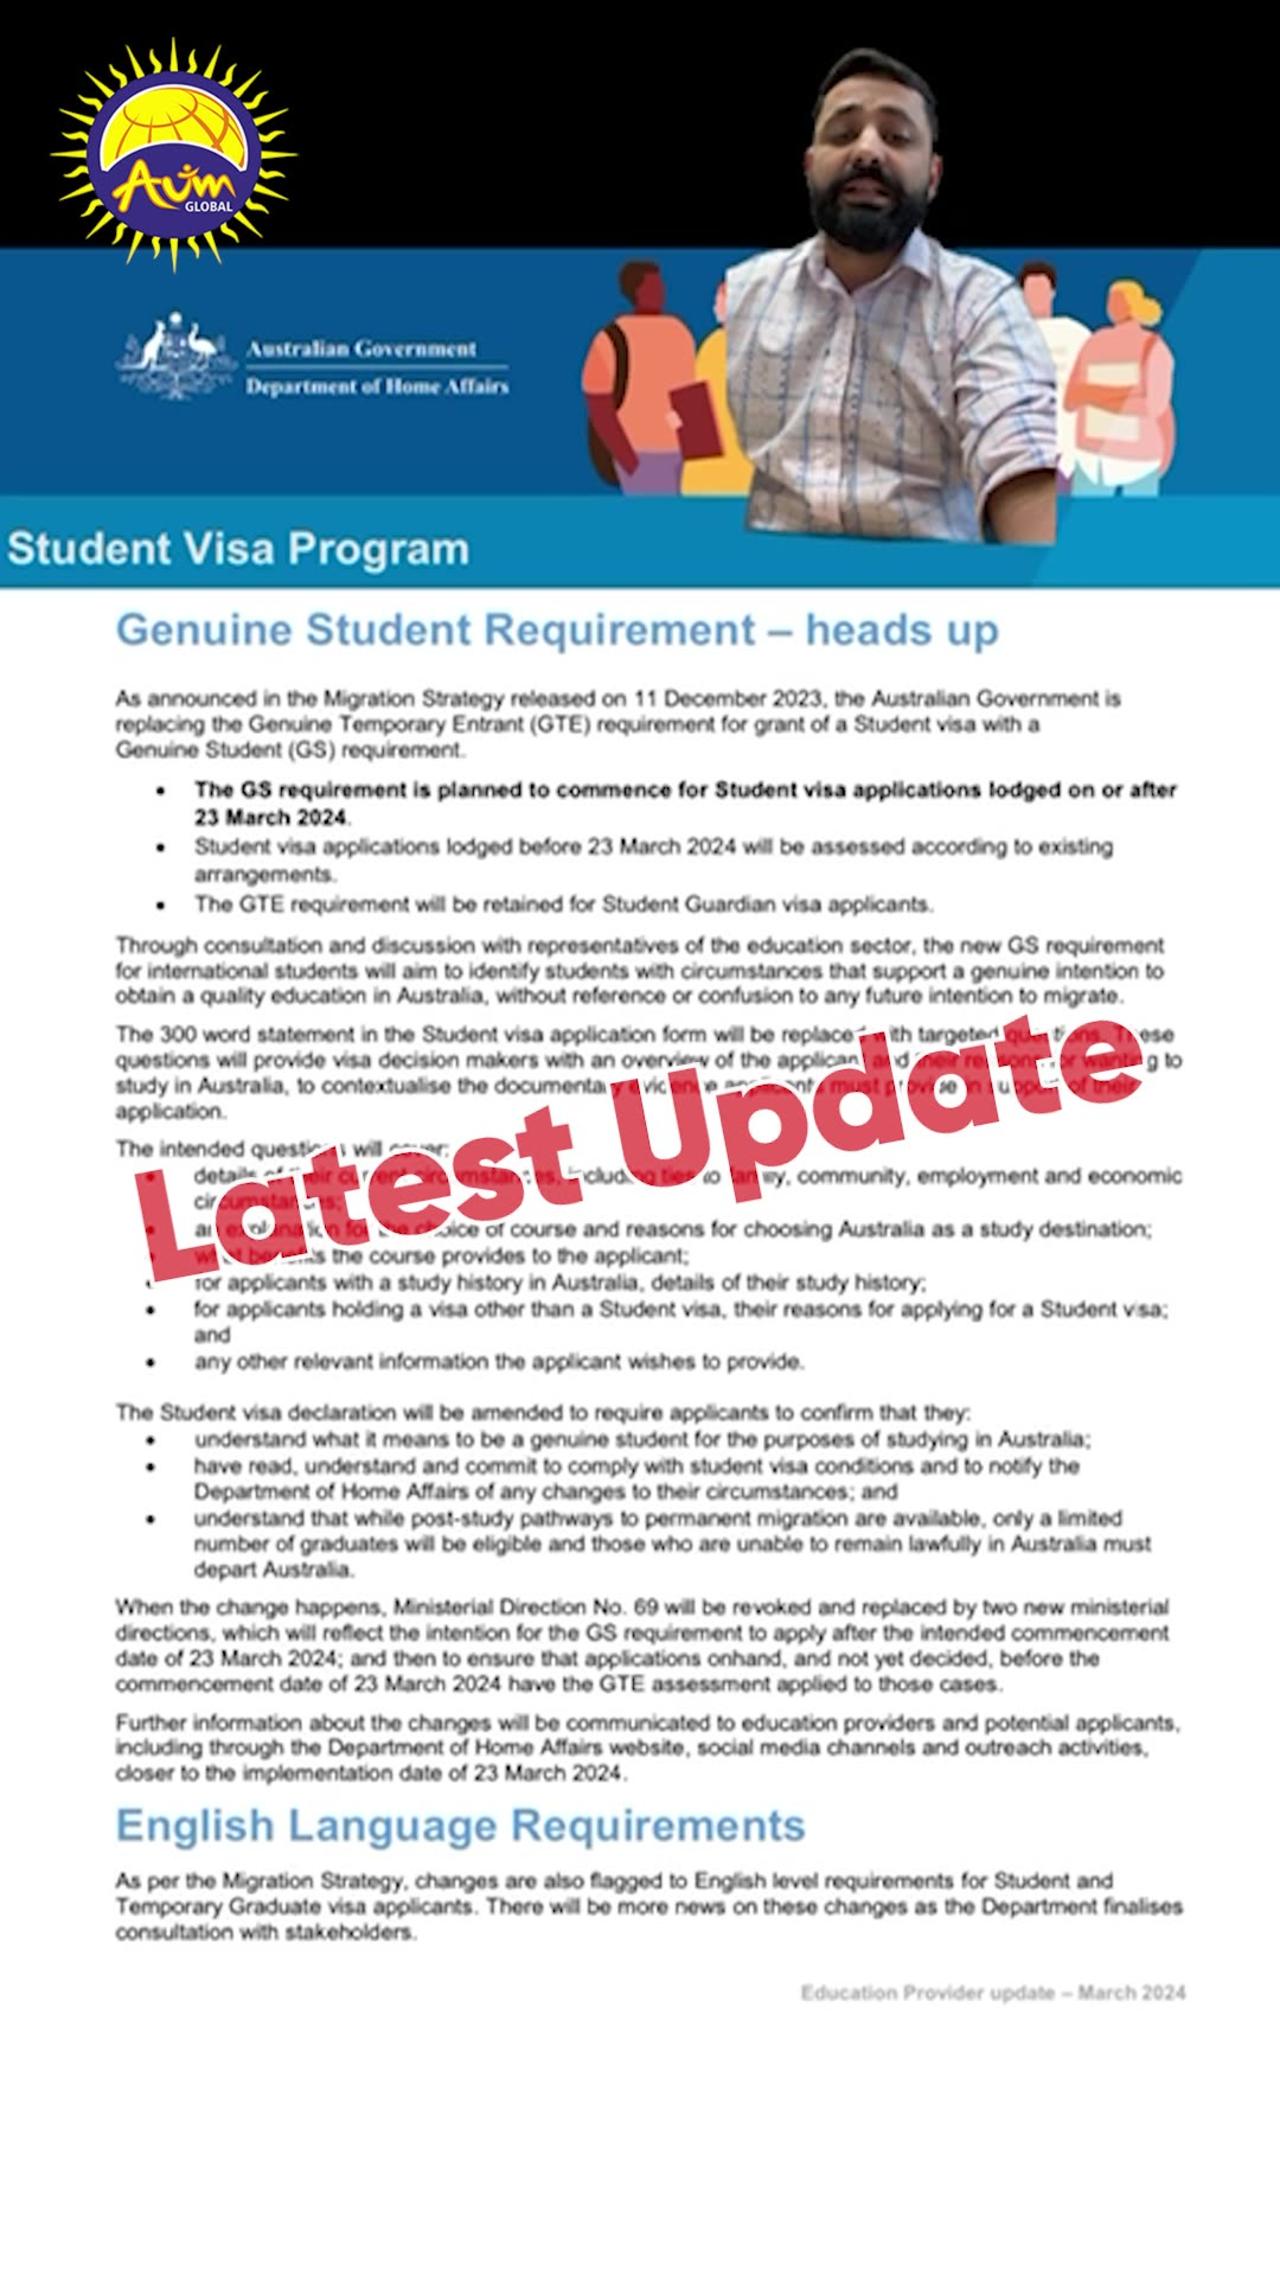 Big changes are coming to the student visa program!